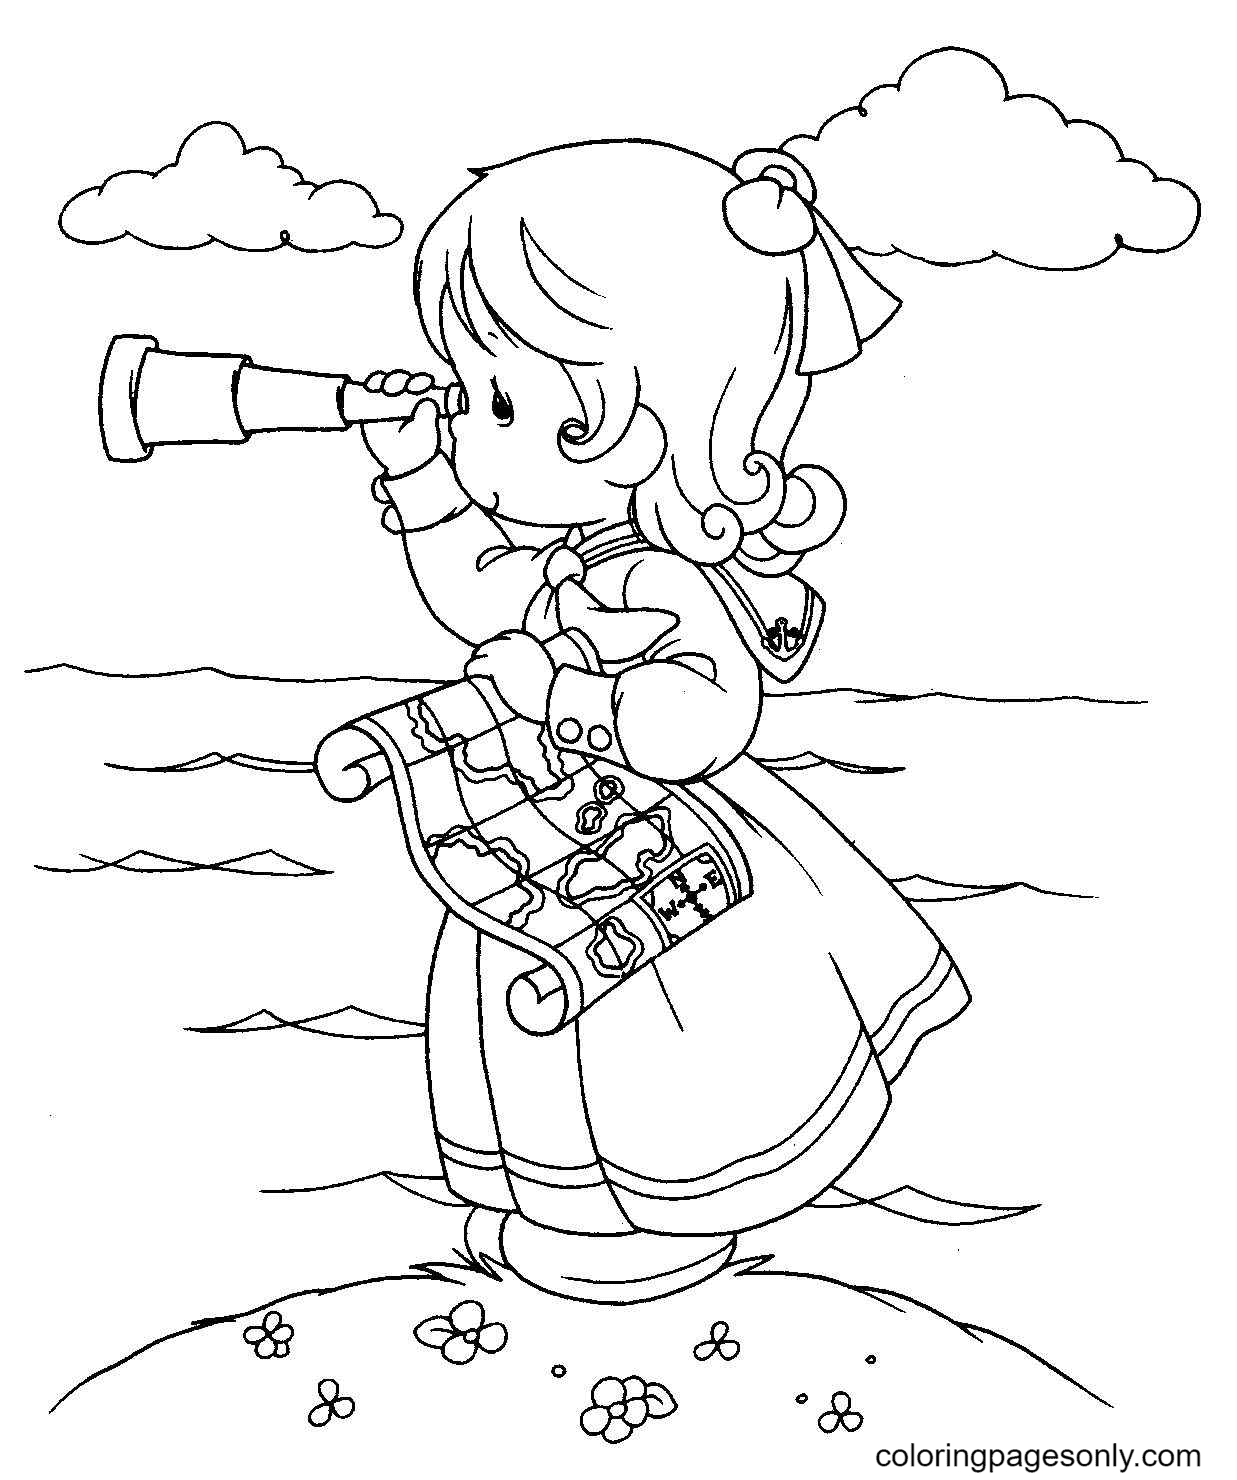 Precious Moment Girl with Telescope Coloring Page